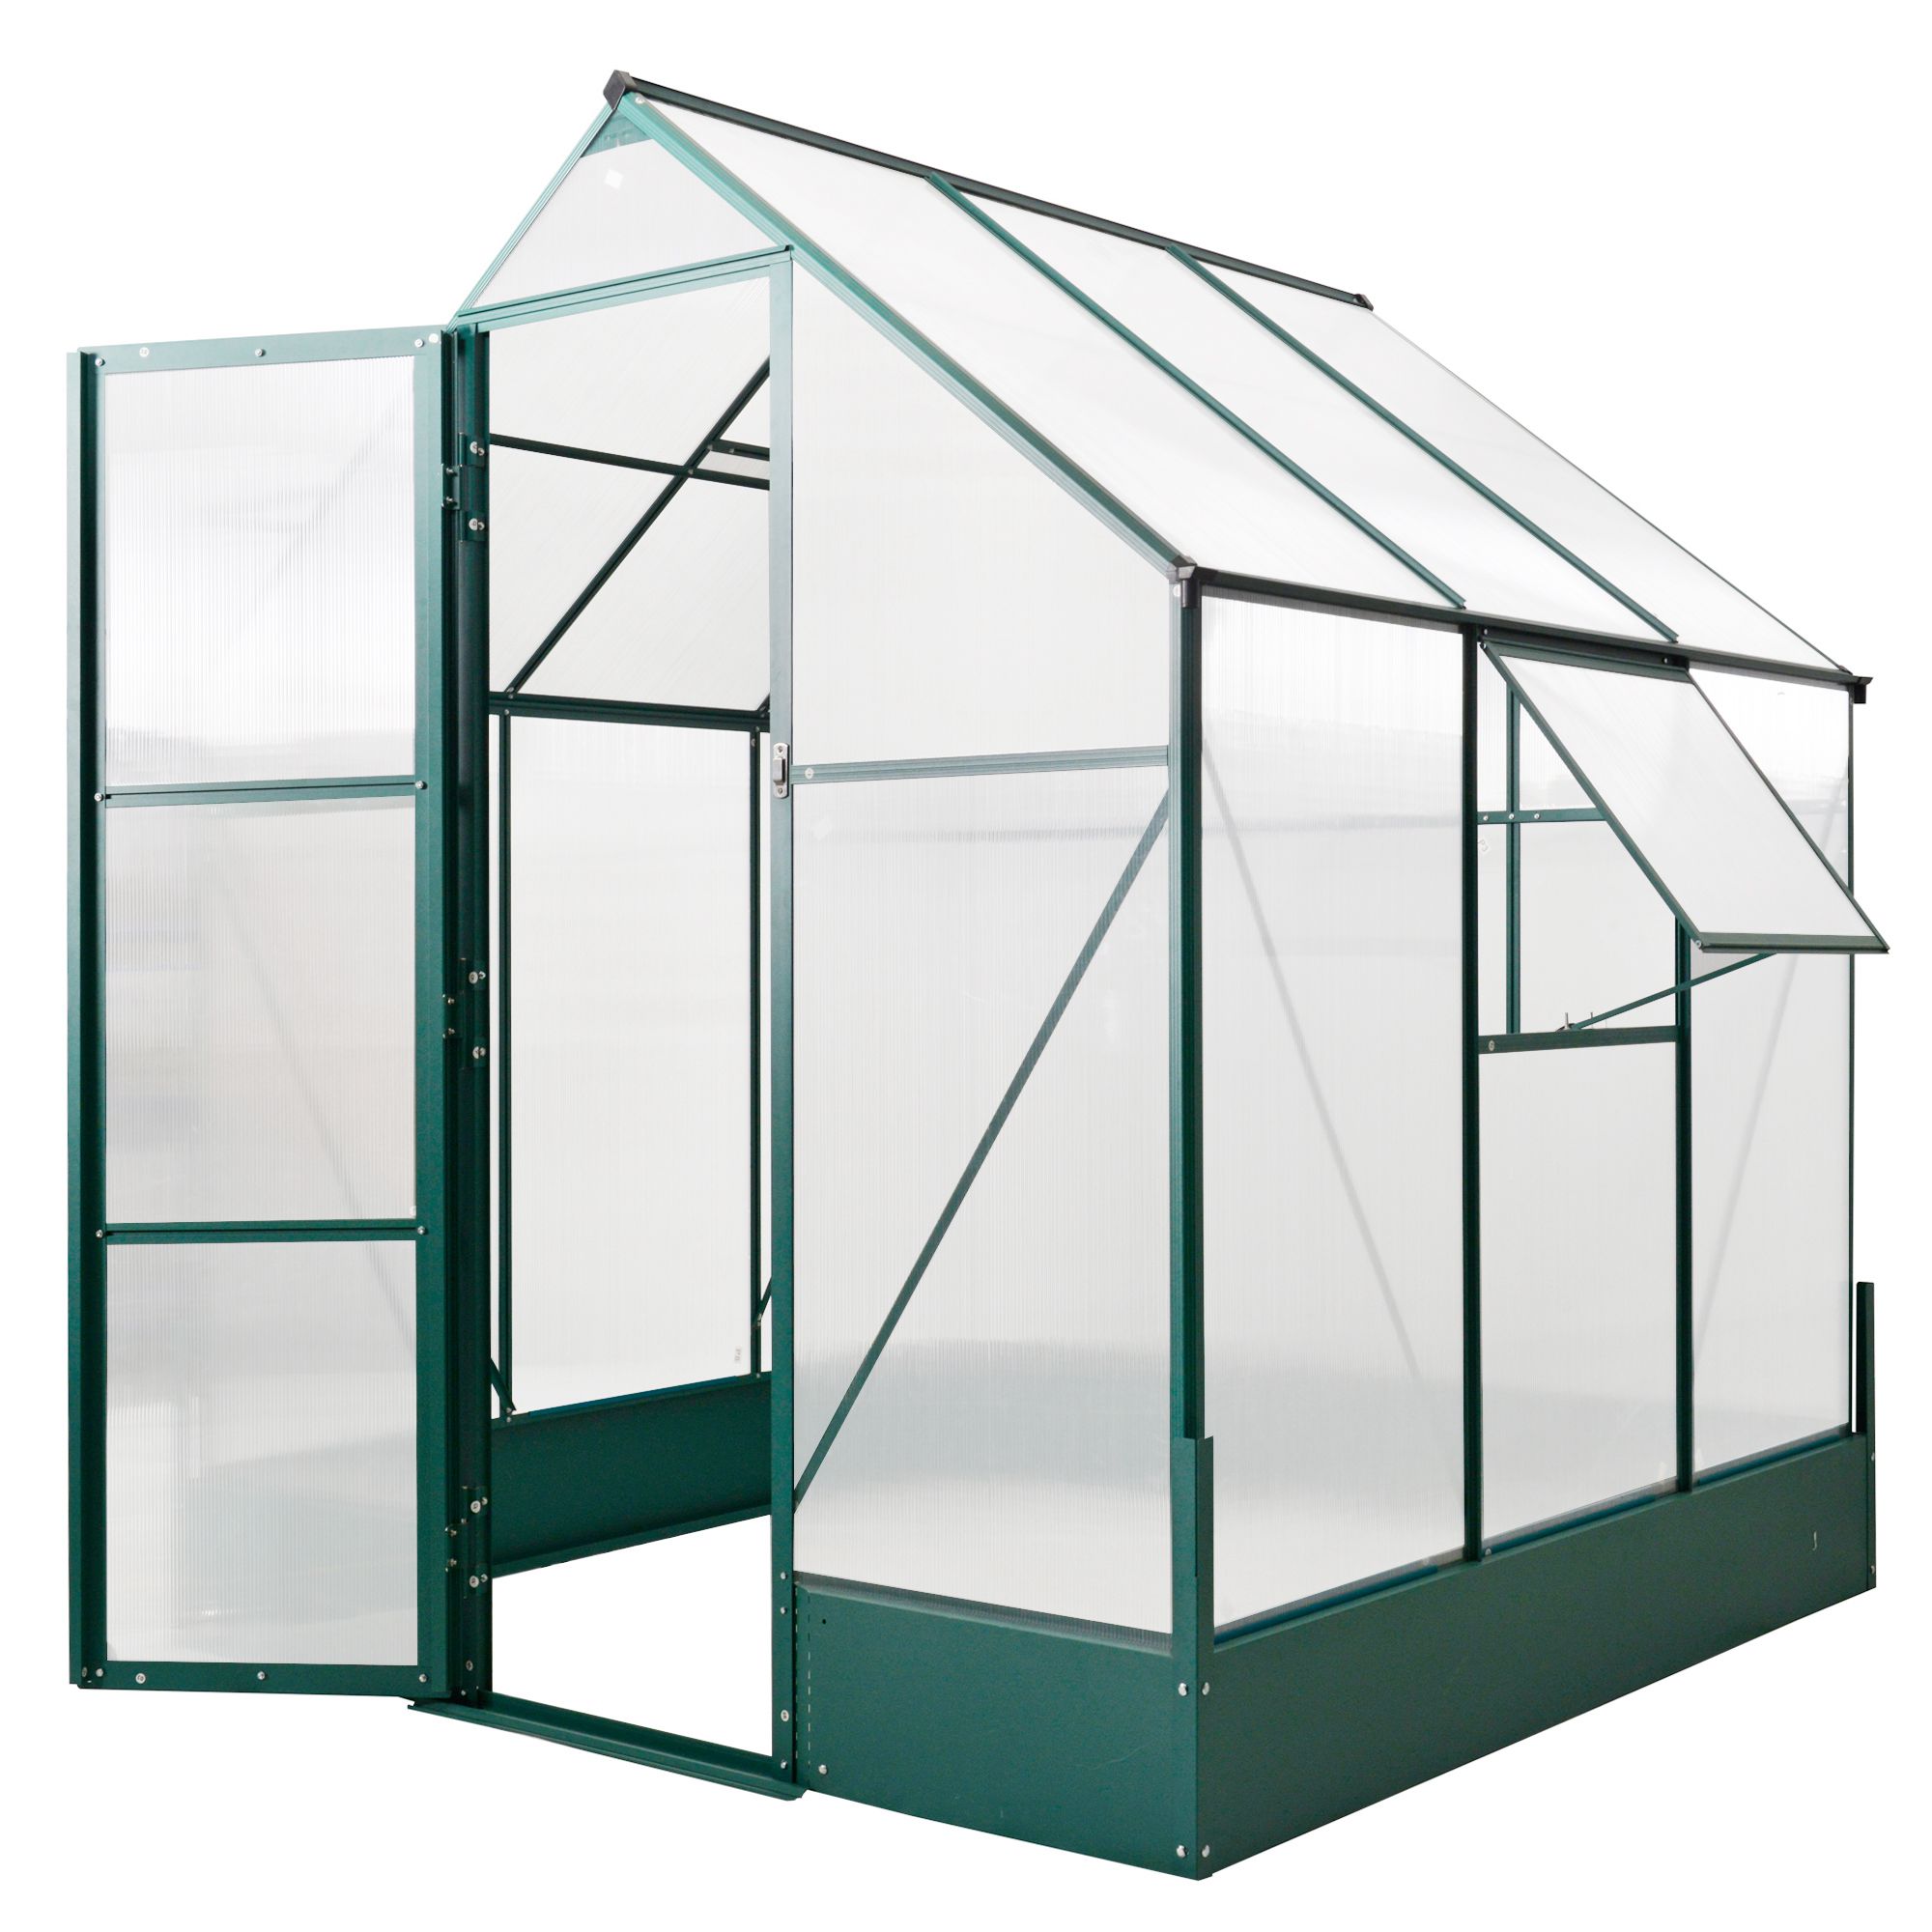 Outsunny 74.75" x 74.75" x 86.5" Walk-in Greenhouse, Plant Hot House with Window & Doors